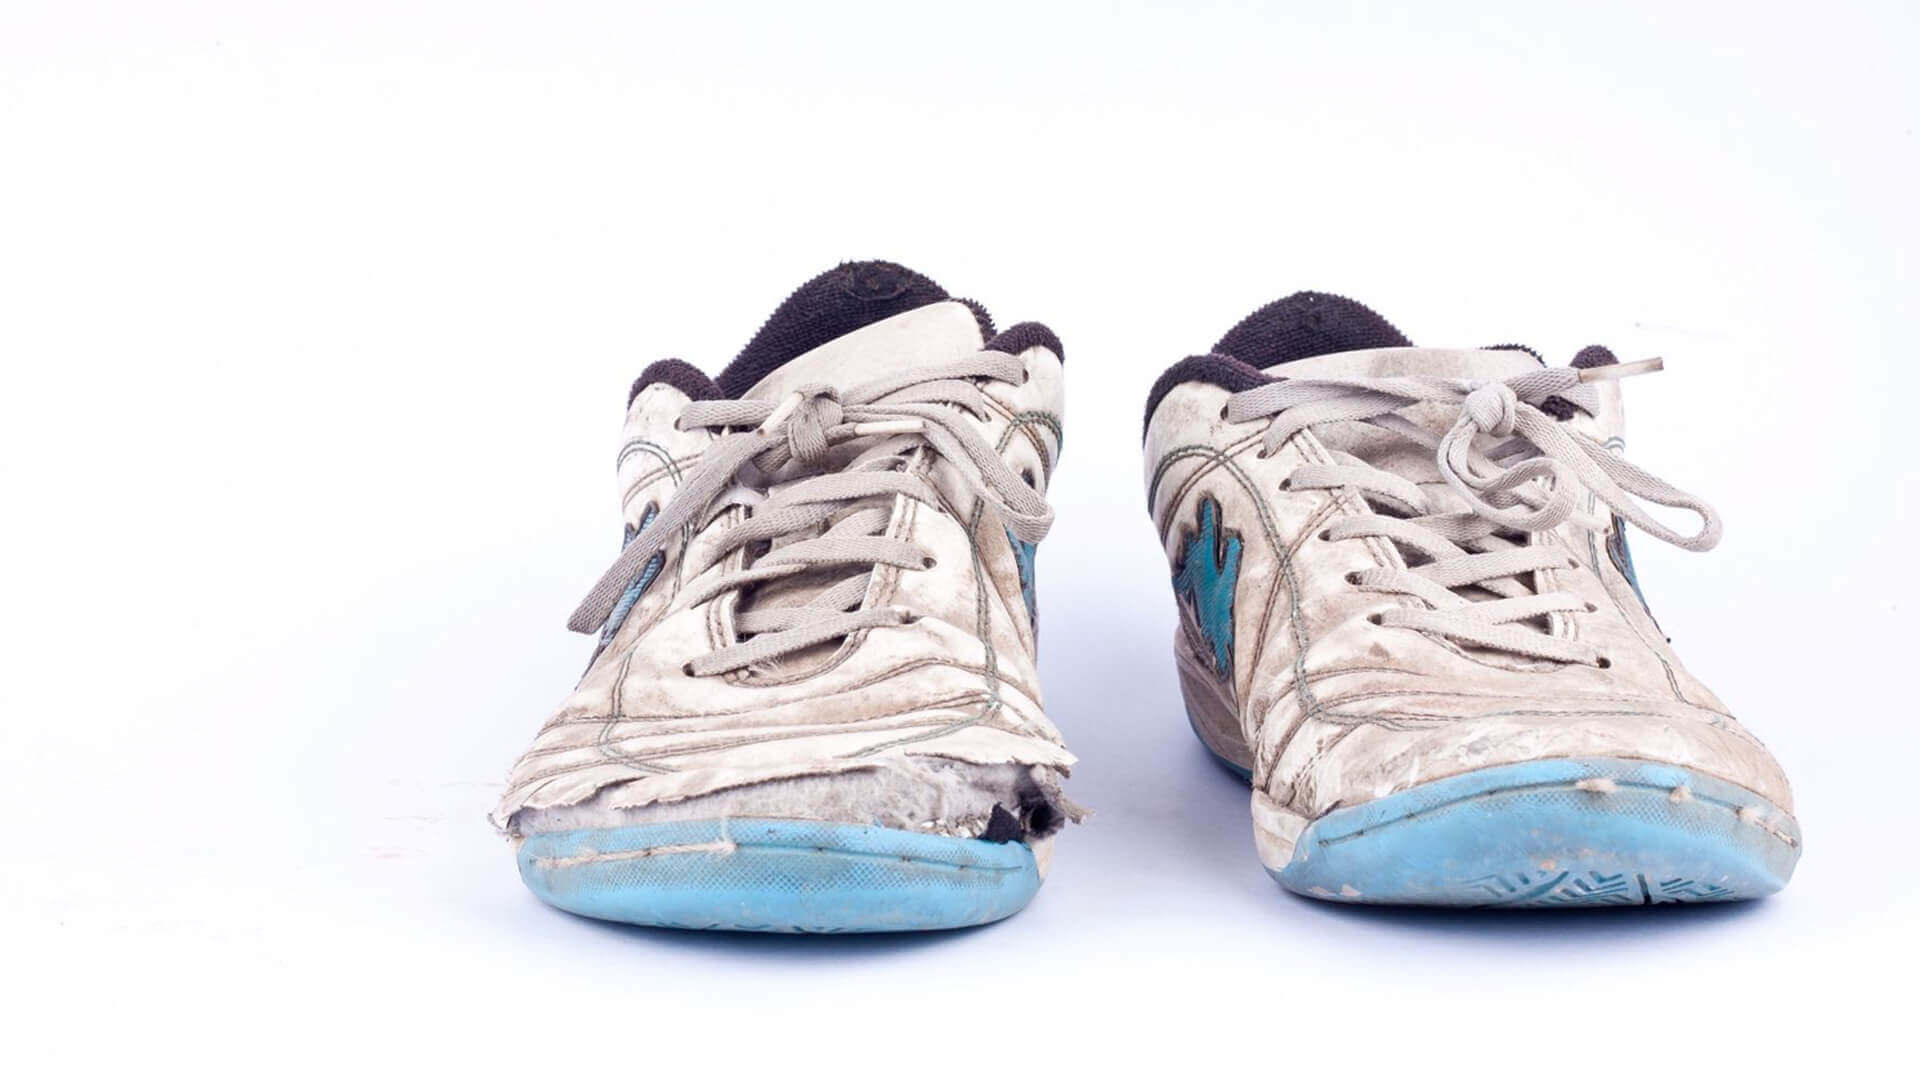 Running Shoe Recycling: How to Recycle Your Run Gear